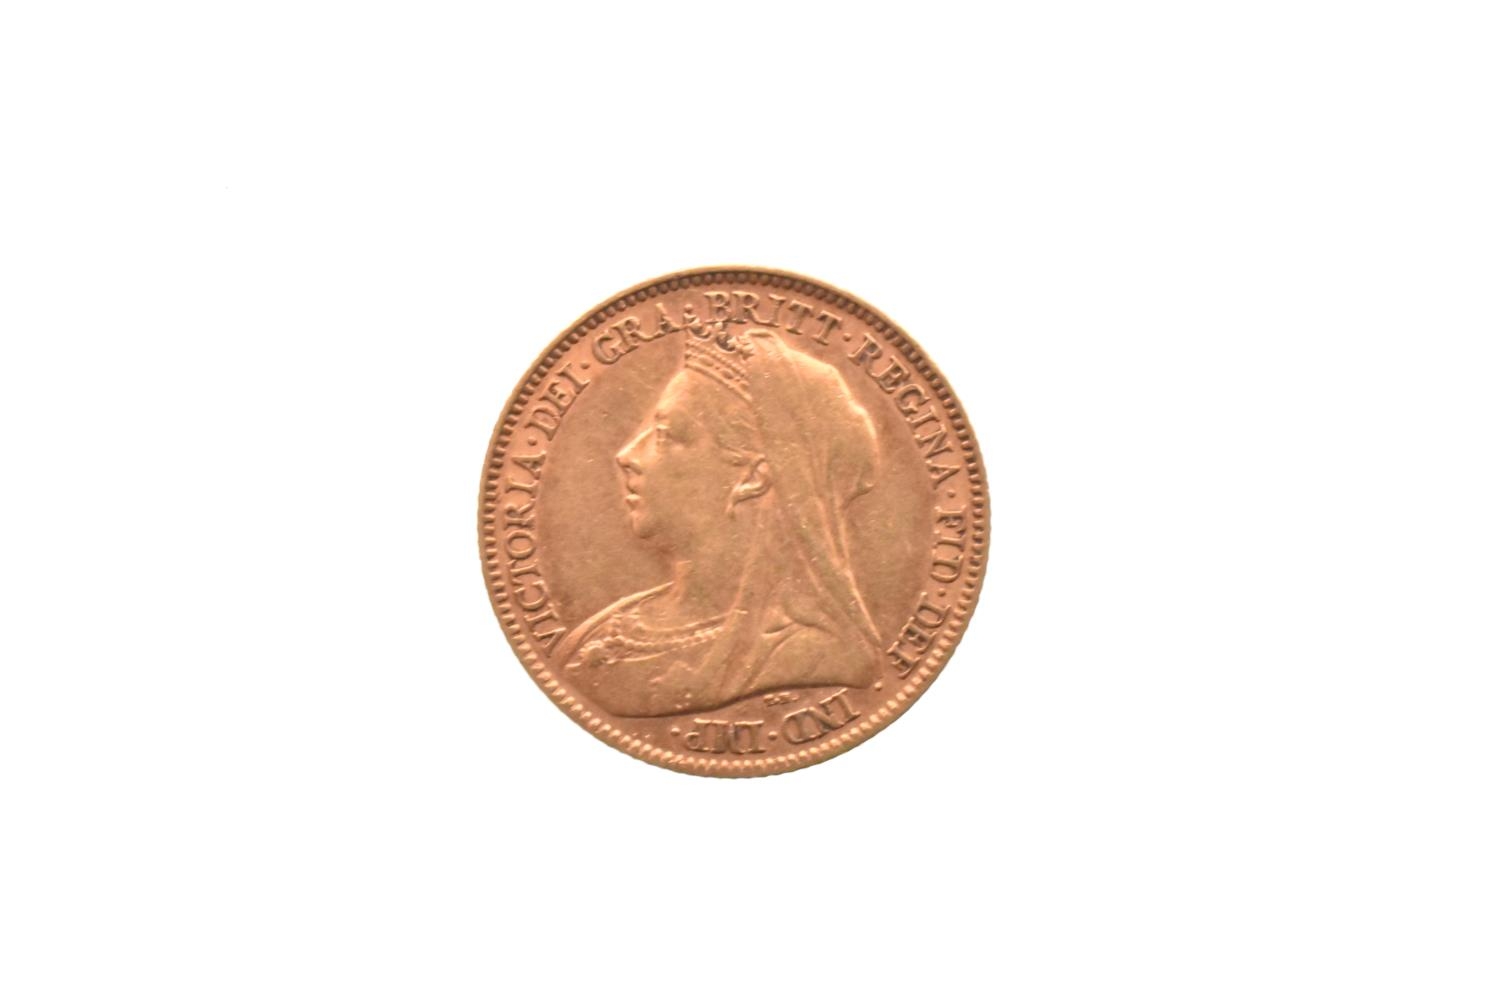 United Kingdom - Victoria (1837-1901), Gold Half Sovereign, dated 1901, London mint, - Image 2 of 2